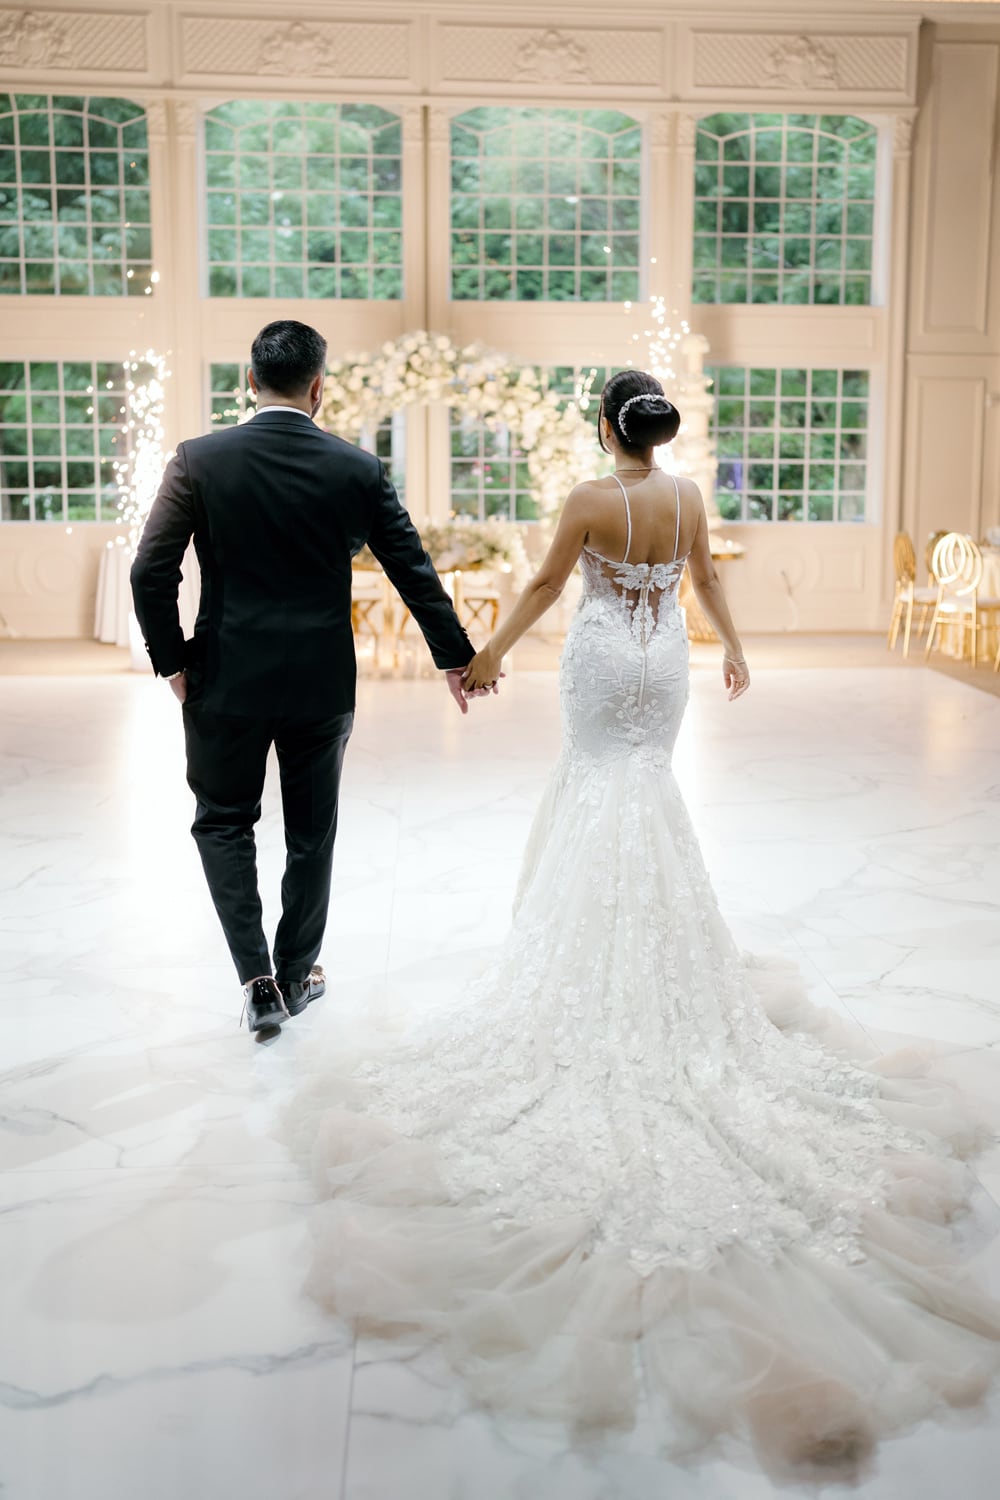 A happy bride and groom walk hand in hand through the elegant Grand Ballroom at the picturesque estate of Florentine Gardens in New Jersey, radiating joy and love on their special day.